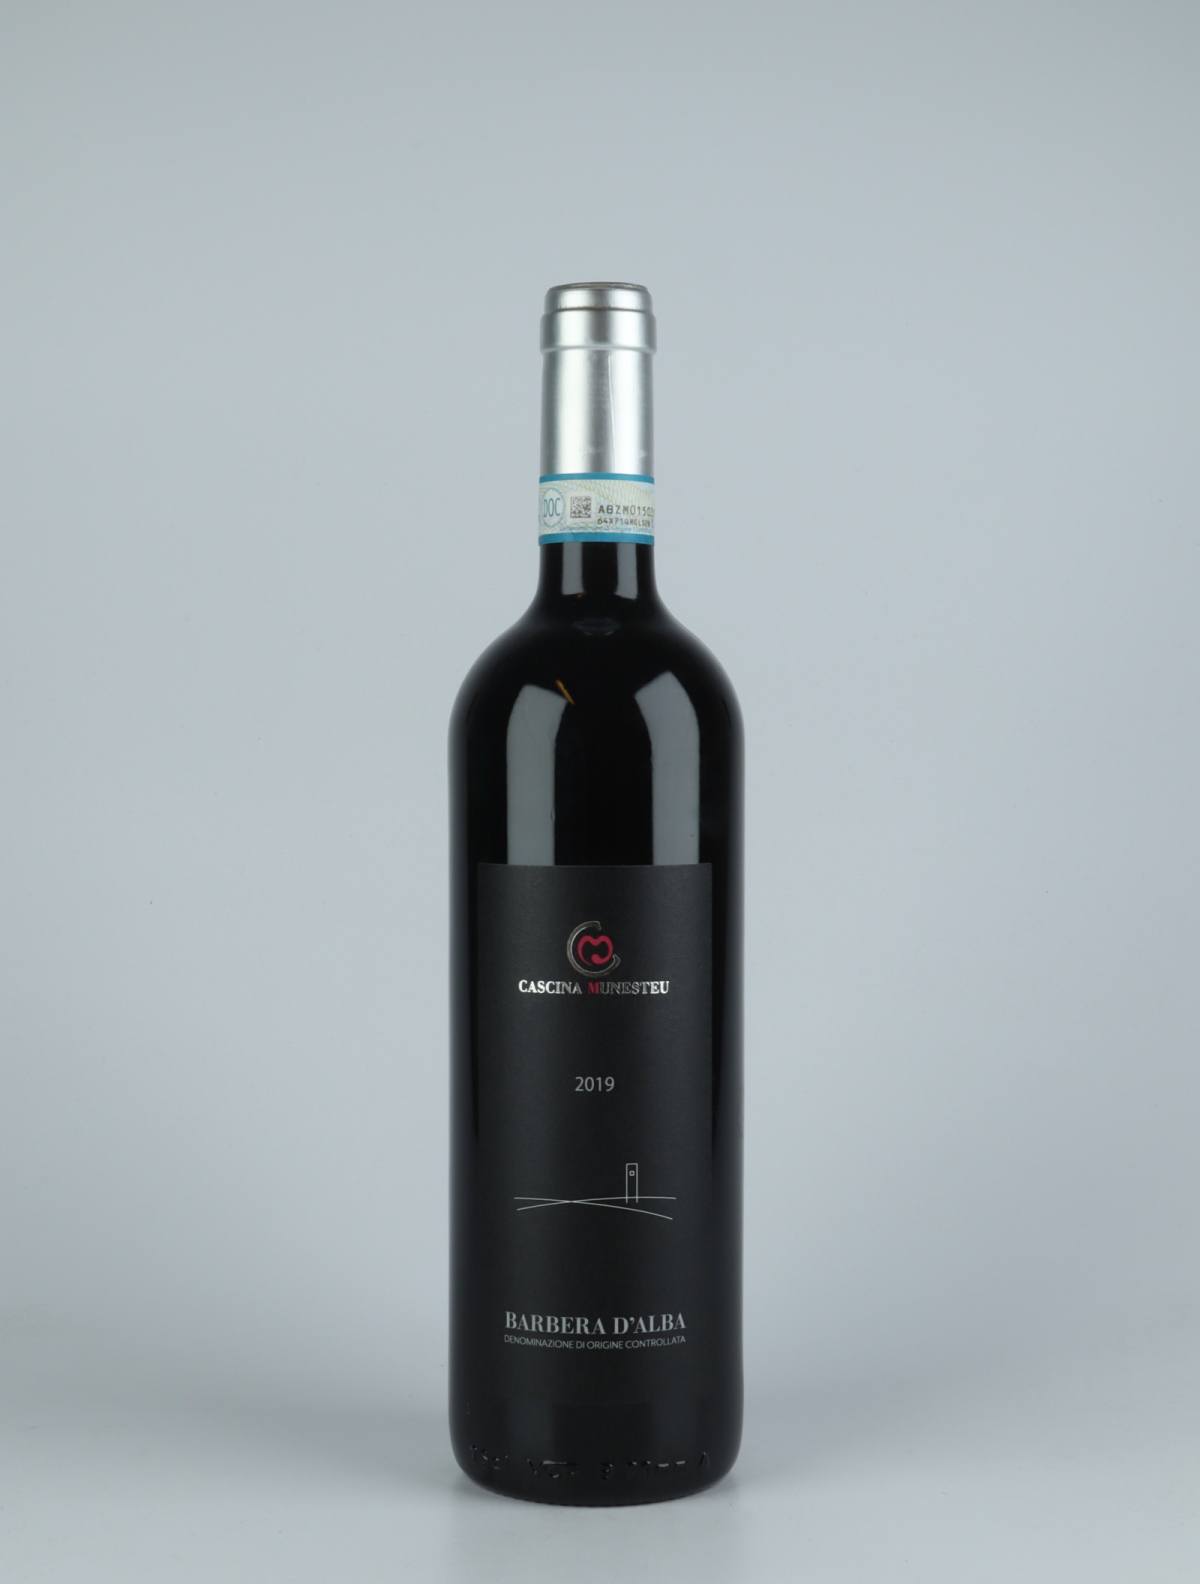 A bottle 2019 Barbera d'Alba Red wine from Cascina Munesteu, Piedmont in Italy